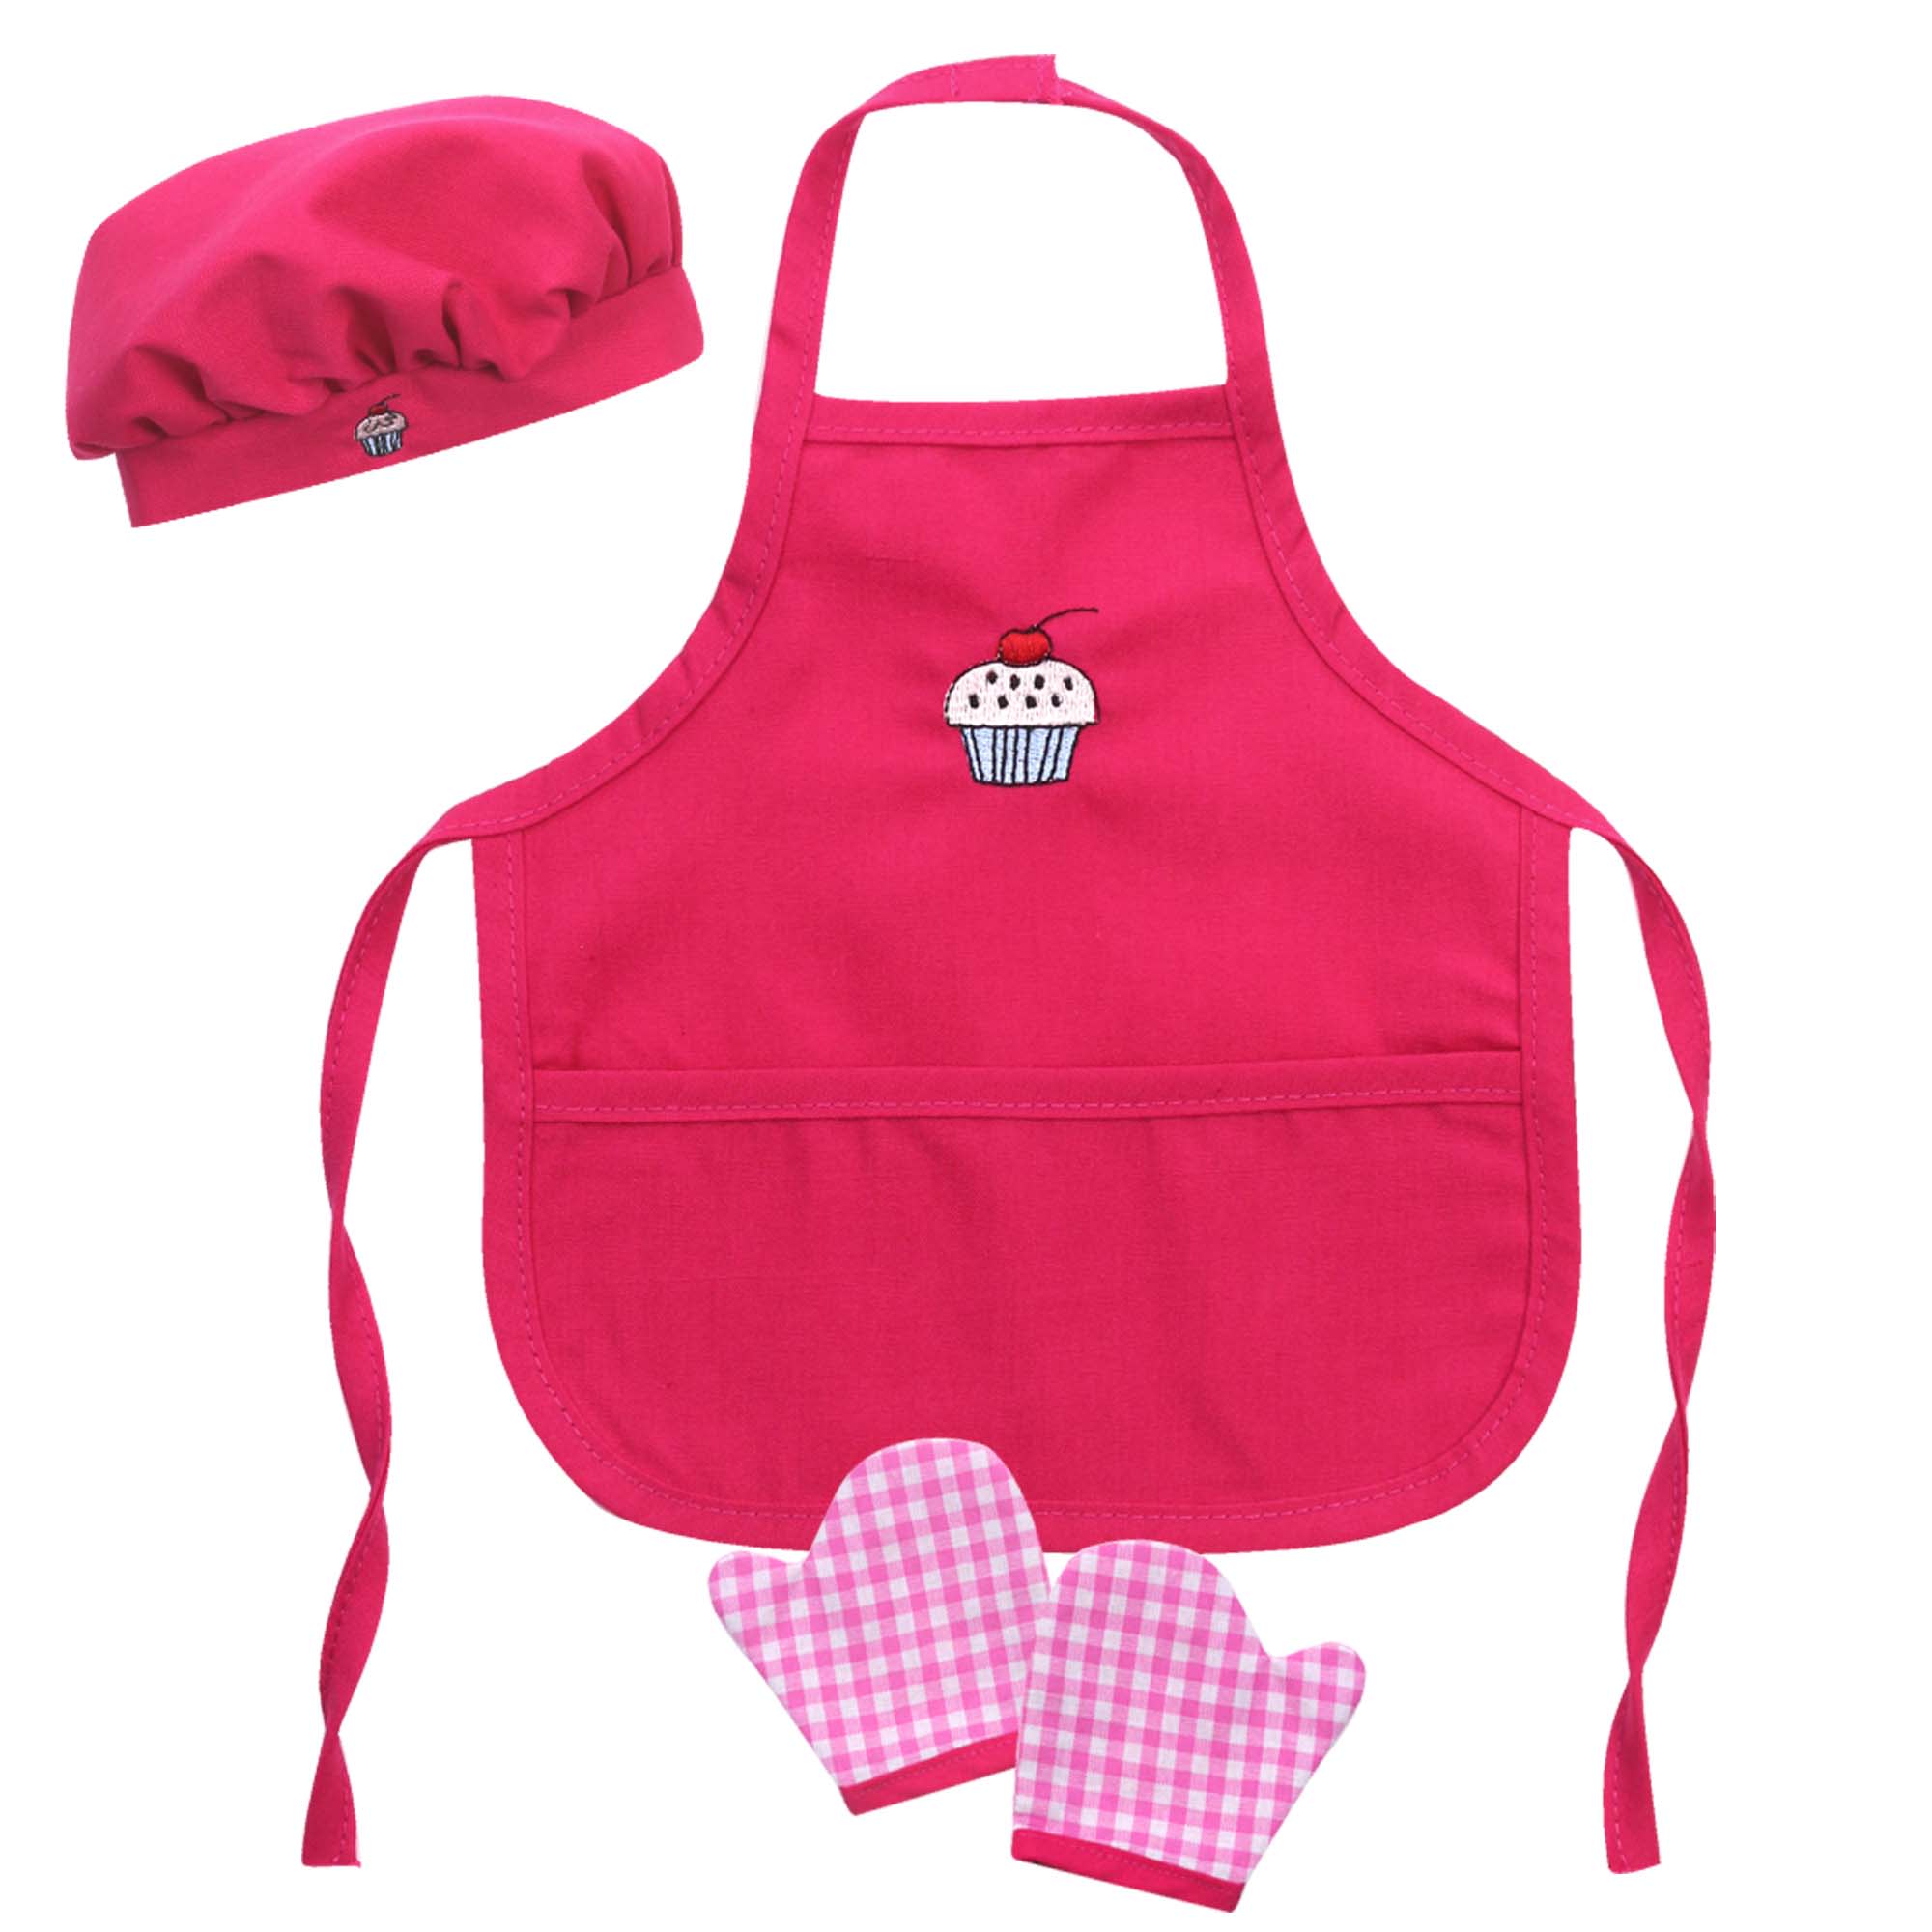 Sophia’s Cupcake Baking Apron, Hat, & Gingham Oven Mitts Complete Matching Accessory Set for 18” Dolls, Hot Pink